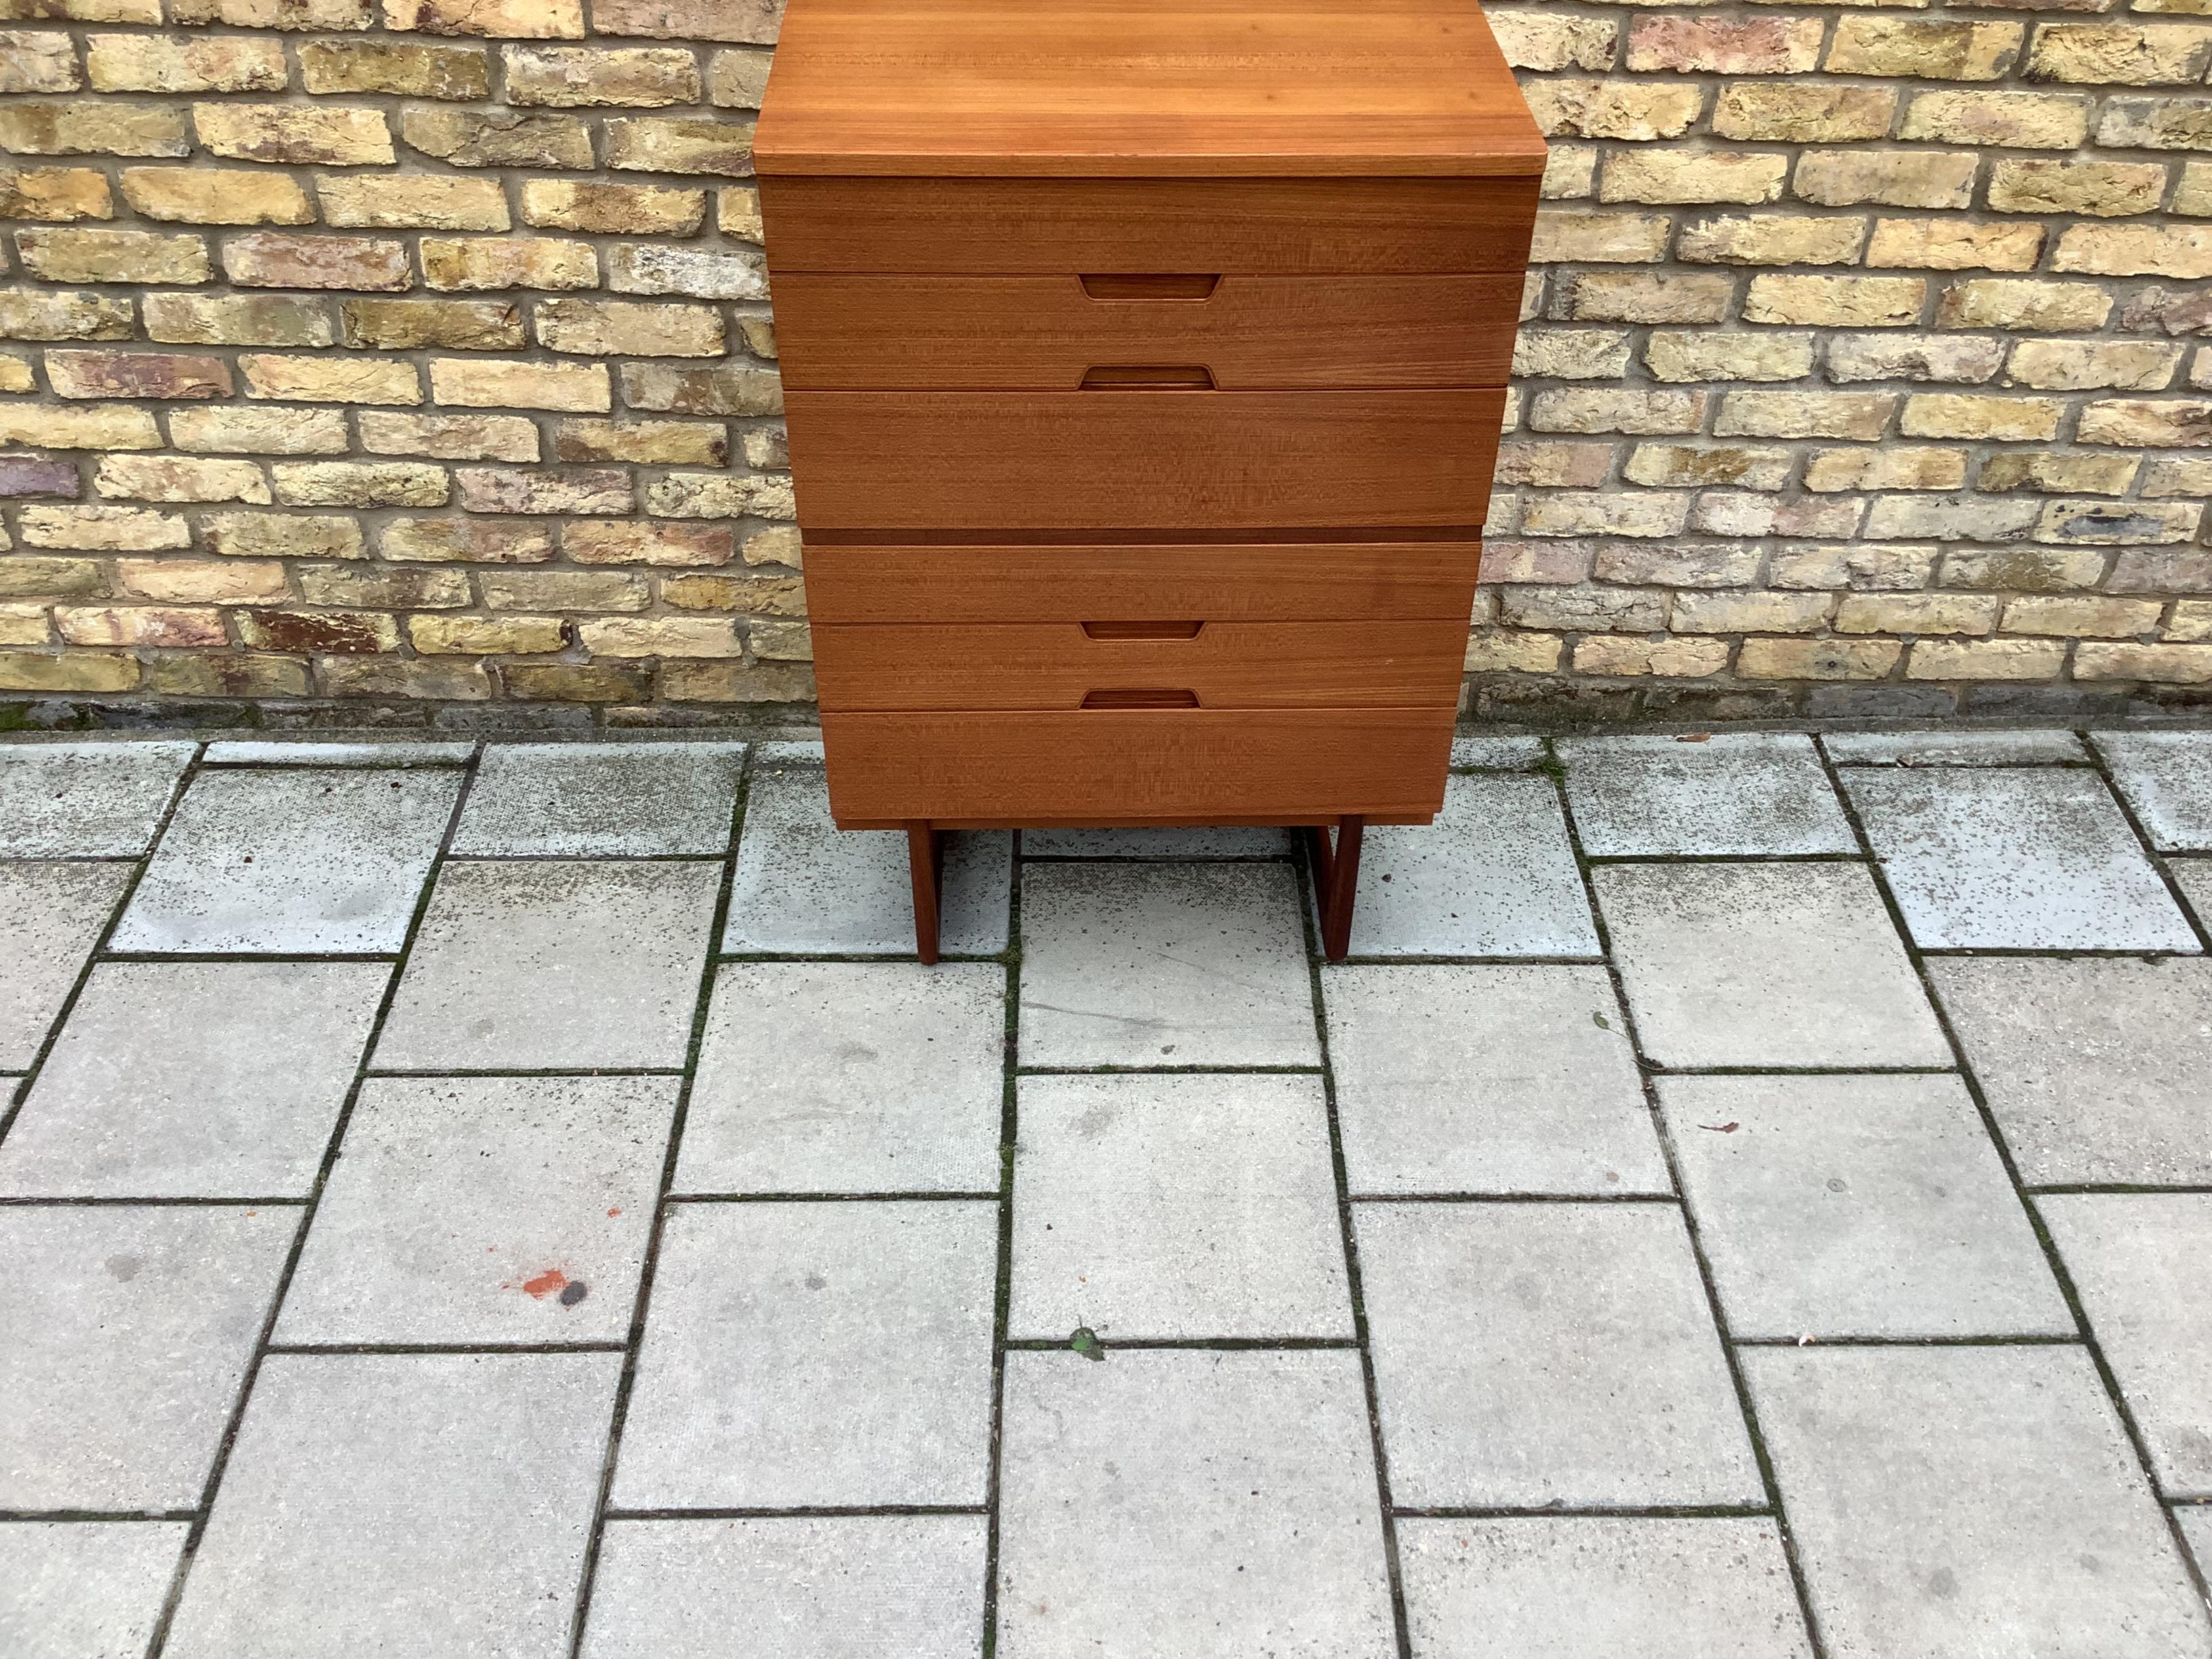 Uniflex Q range chest of drawers by Gunther Hoffstead. 

The Danish designer Gunther Hoffstead designed for the small innovative firm of Uniflex in the early 1960s. He designed some of the most modern looking pieces in the UK at this time. The Q